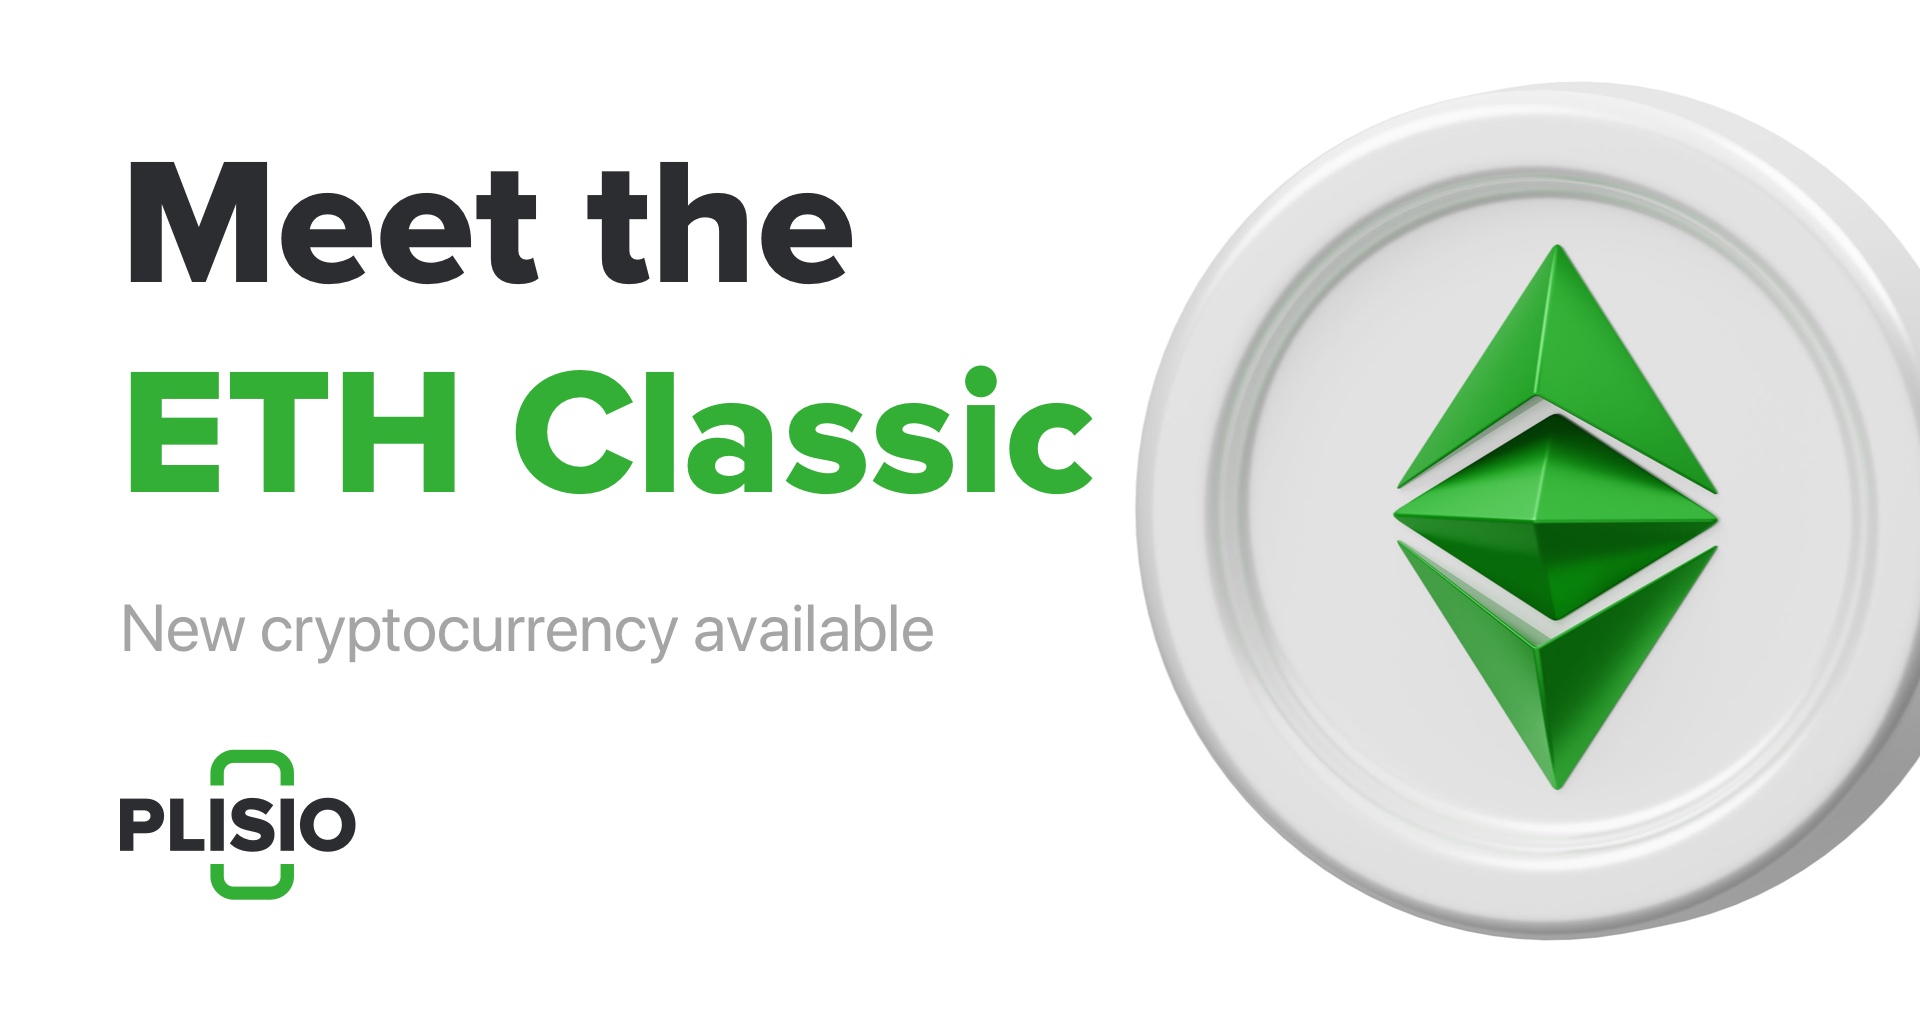 Ethereum Classic is Available. New Cryptocurrency!